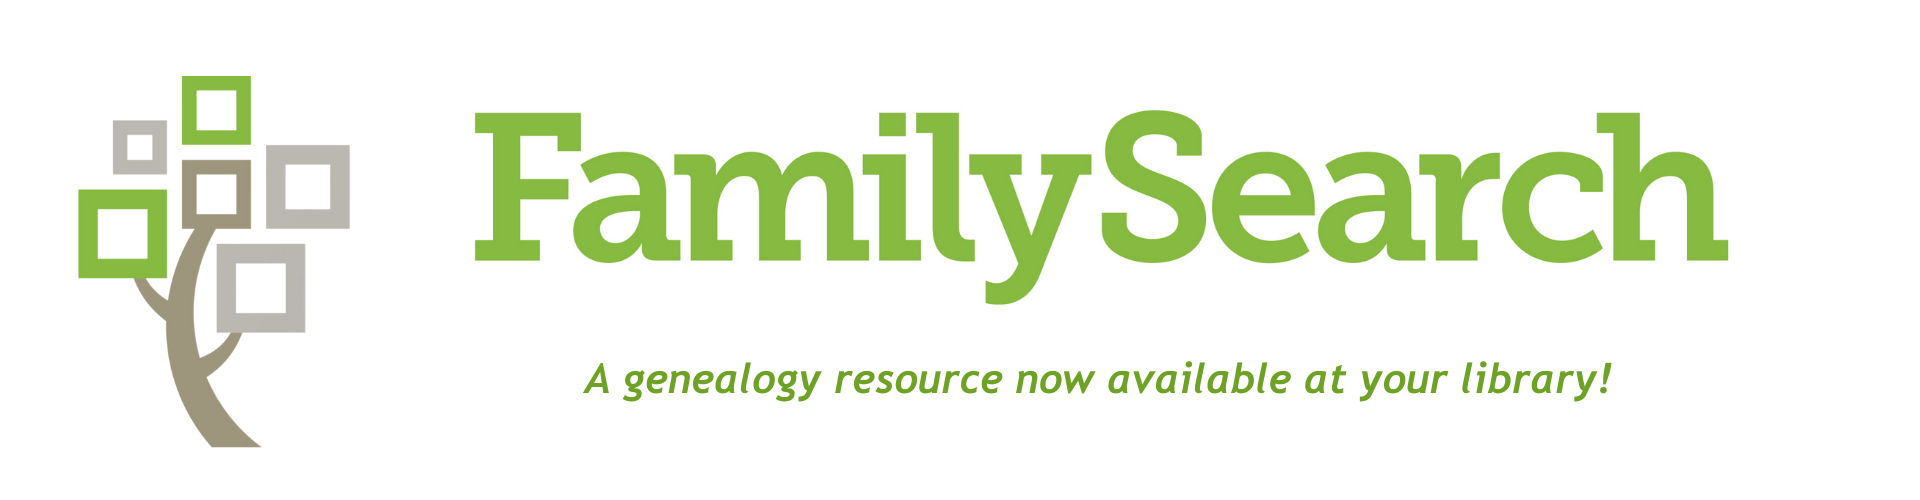 Family Search: A genealogy resource now available at your library!